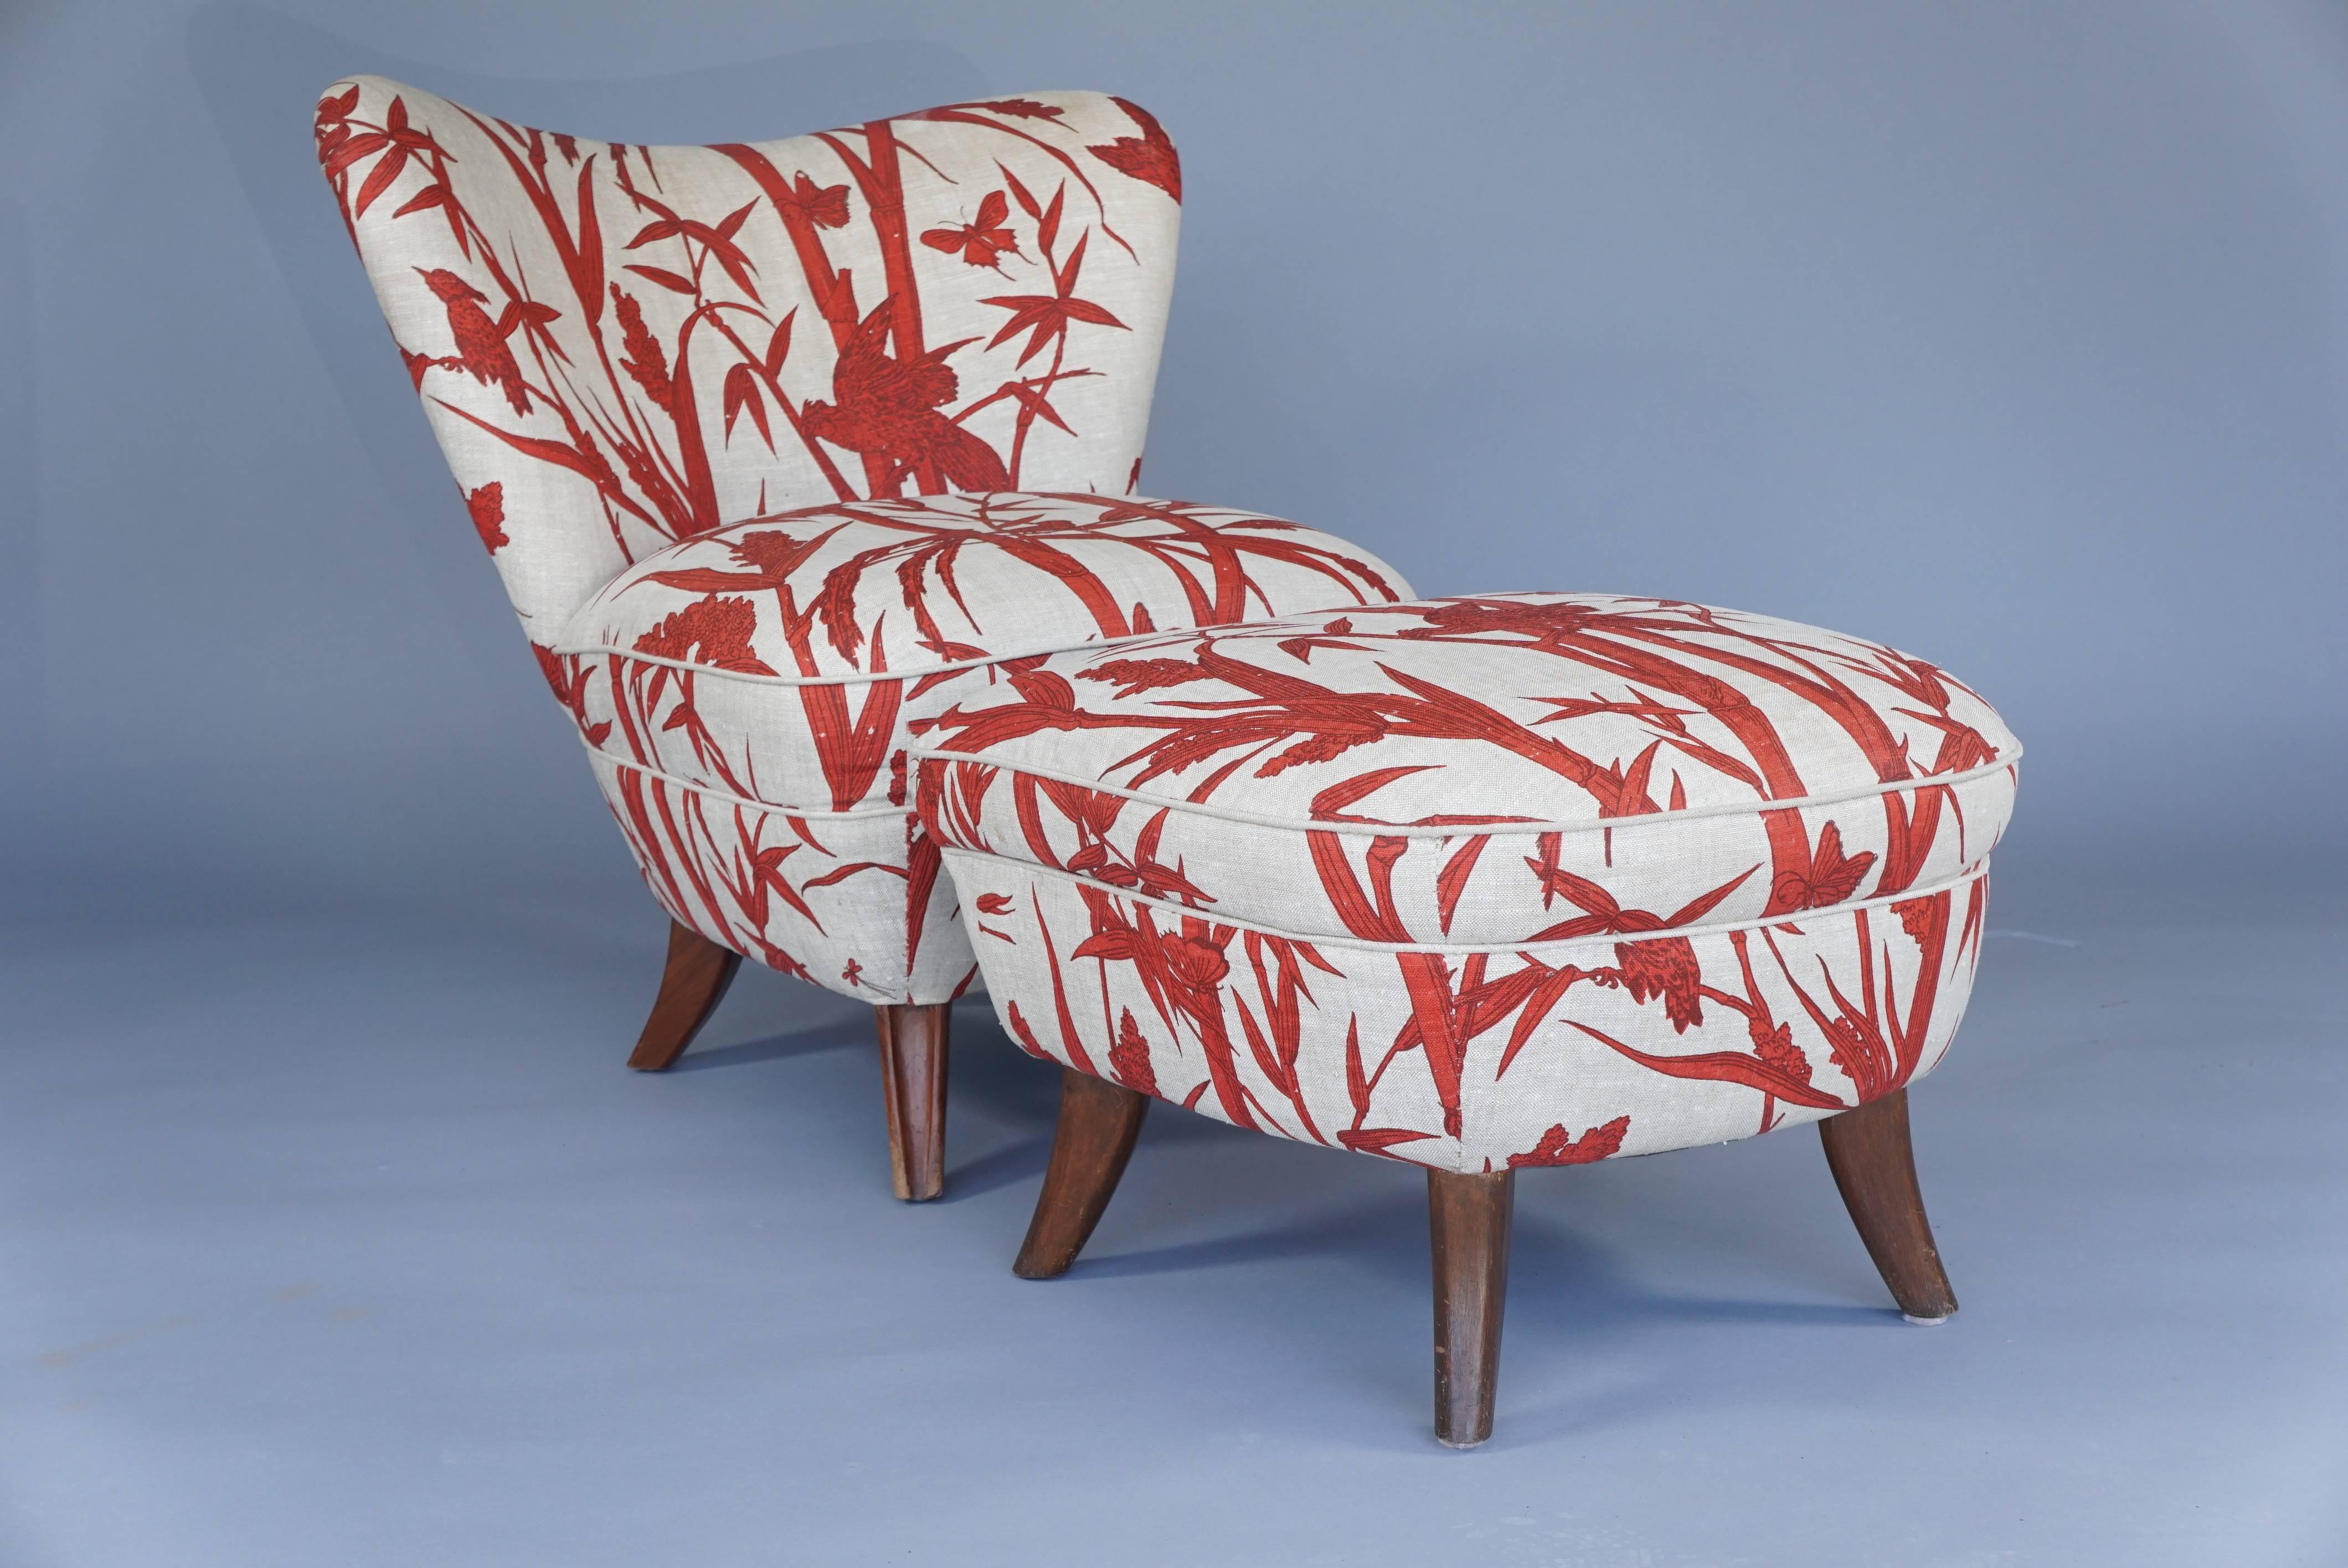 Stylish chair upholstered in red and white silk-screened linen.
Ottoman measures: 22